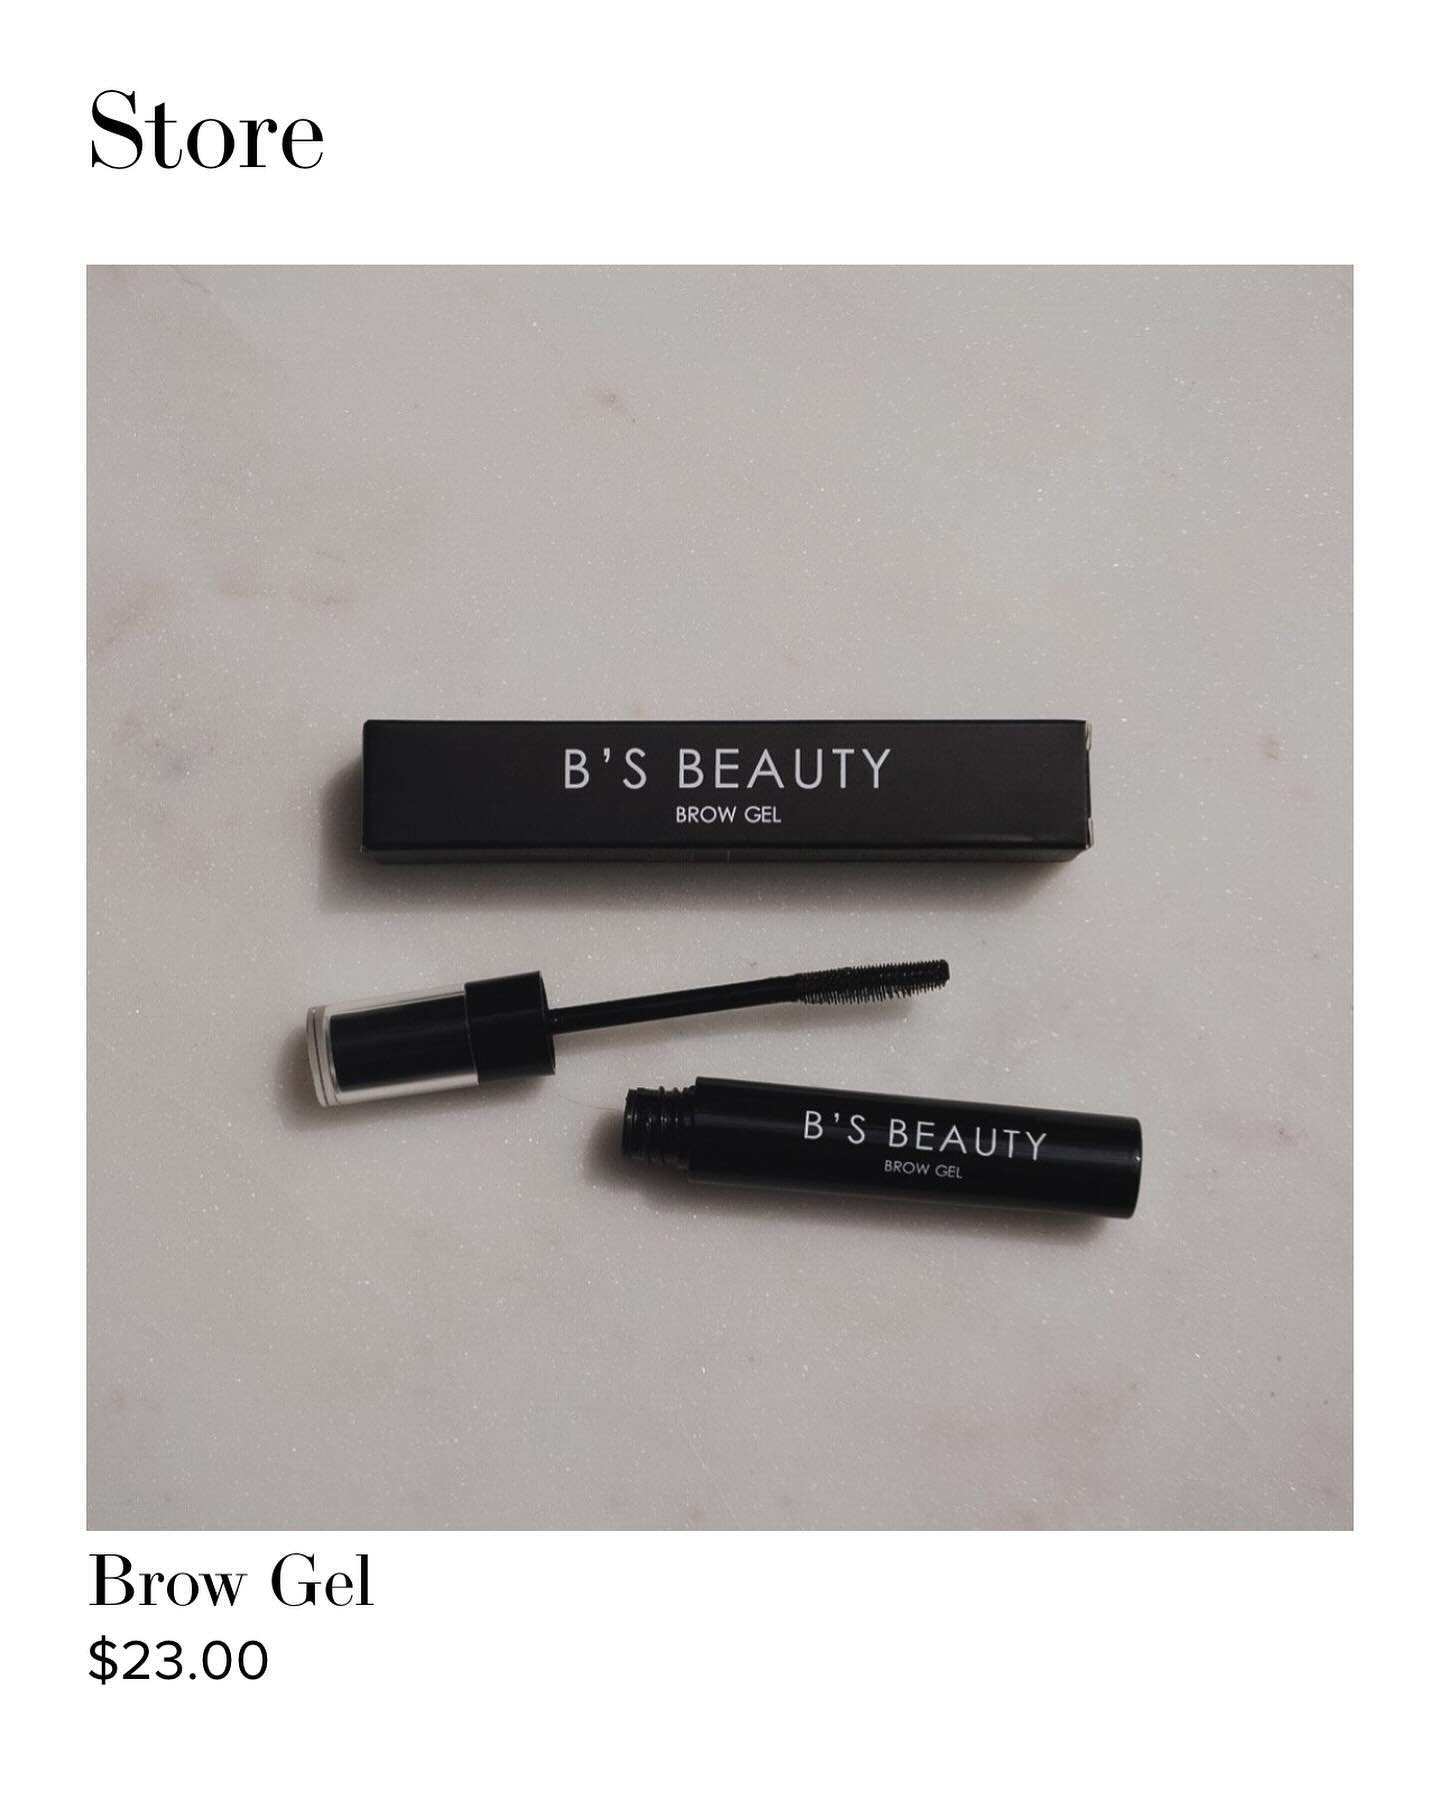 B&rsquo;s Beauty Brow Gel is now available online for purchase! Visit our website at www.britsbeauty.com and click on &ldquo;store&rdquo; under the menu option. 🫶🏼